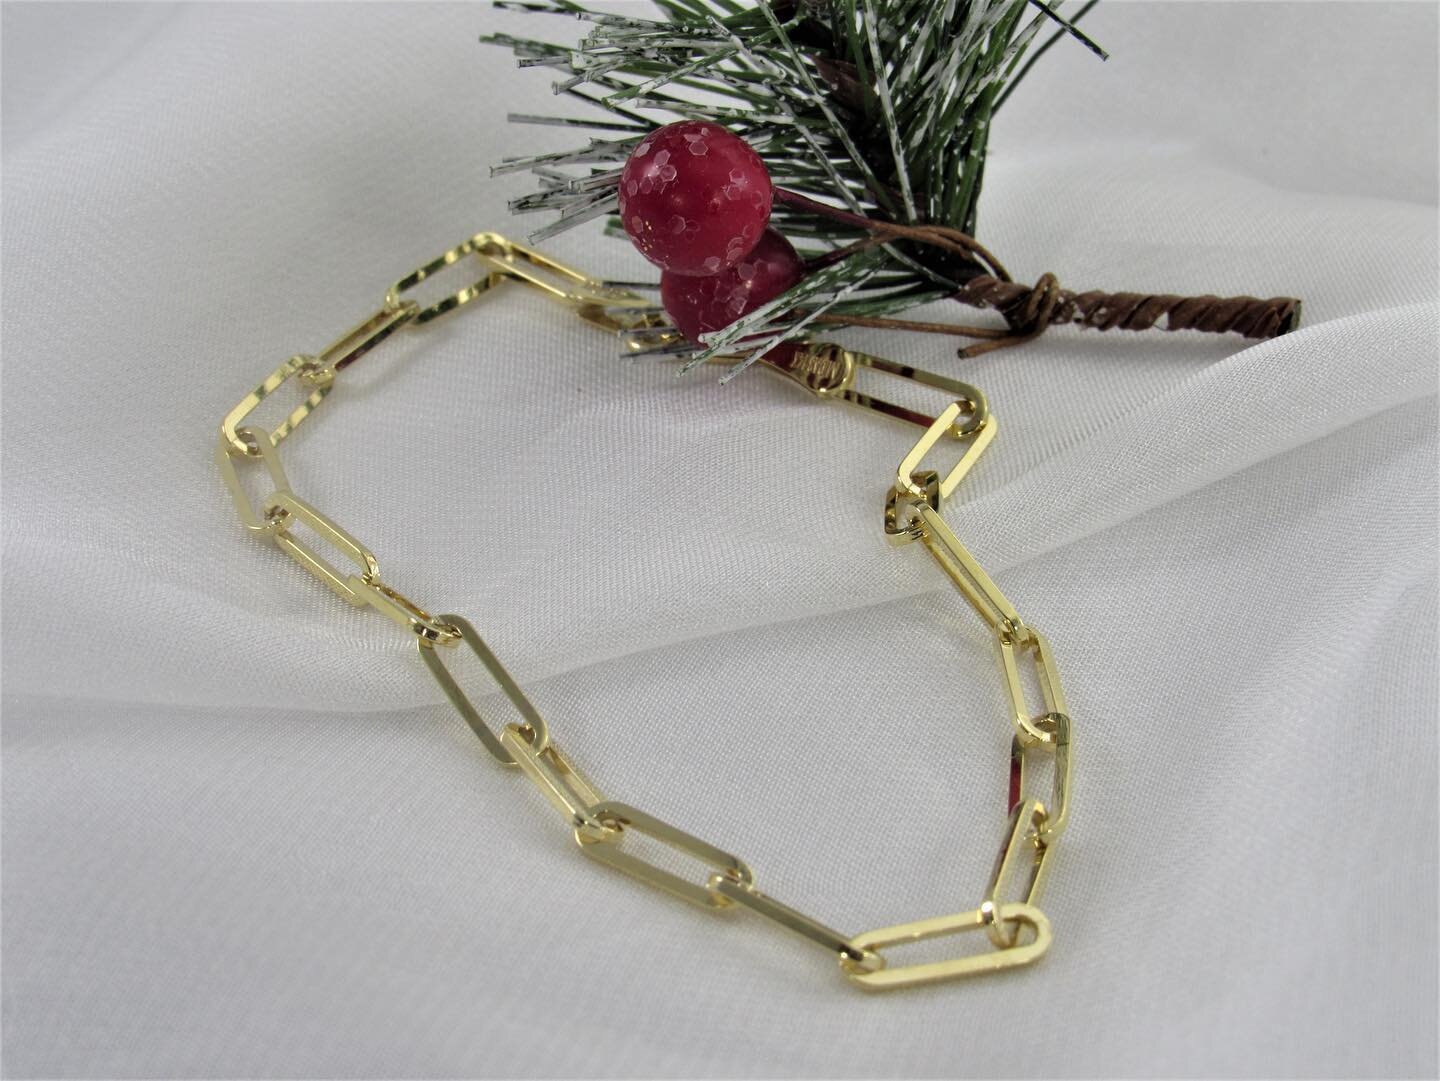 Our popular and stylish &ldquo;paperclip&rdquo; bracelet in 14k yellow gold makes a luxurious stocking stuffer!! 🎁  #thejewelersbenchhershey #hershey #hersheypa #jewelery #jeweler #fashion #gold #goldbracelet #paperclip #paperclipbracelet #yellowgol